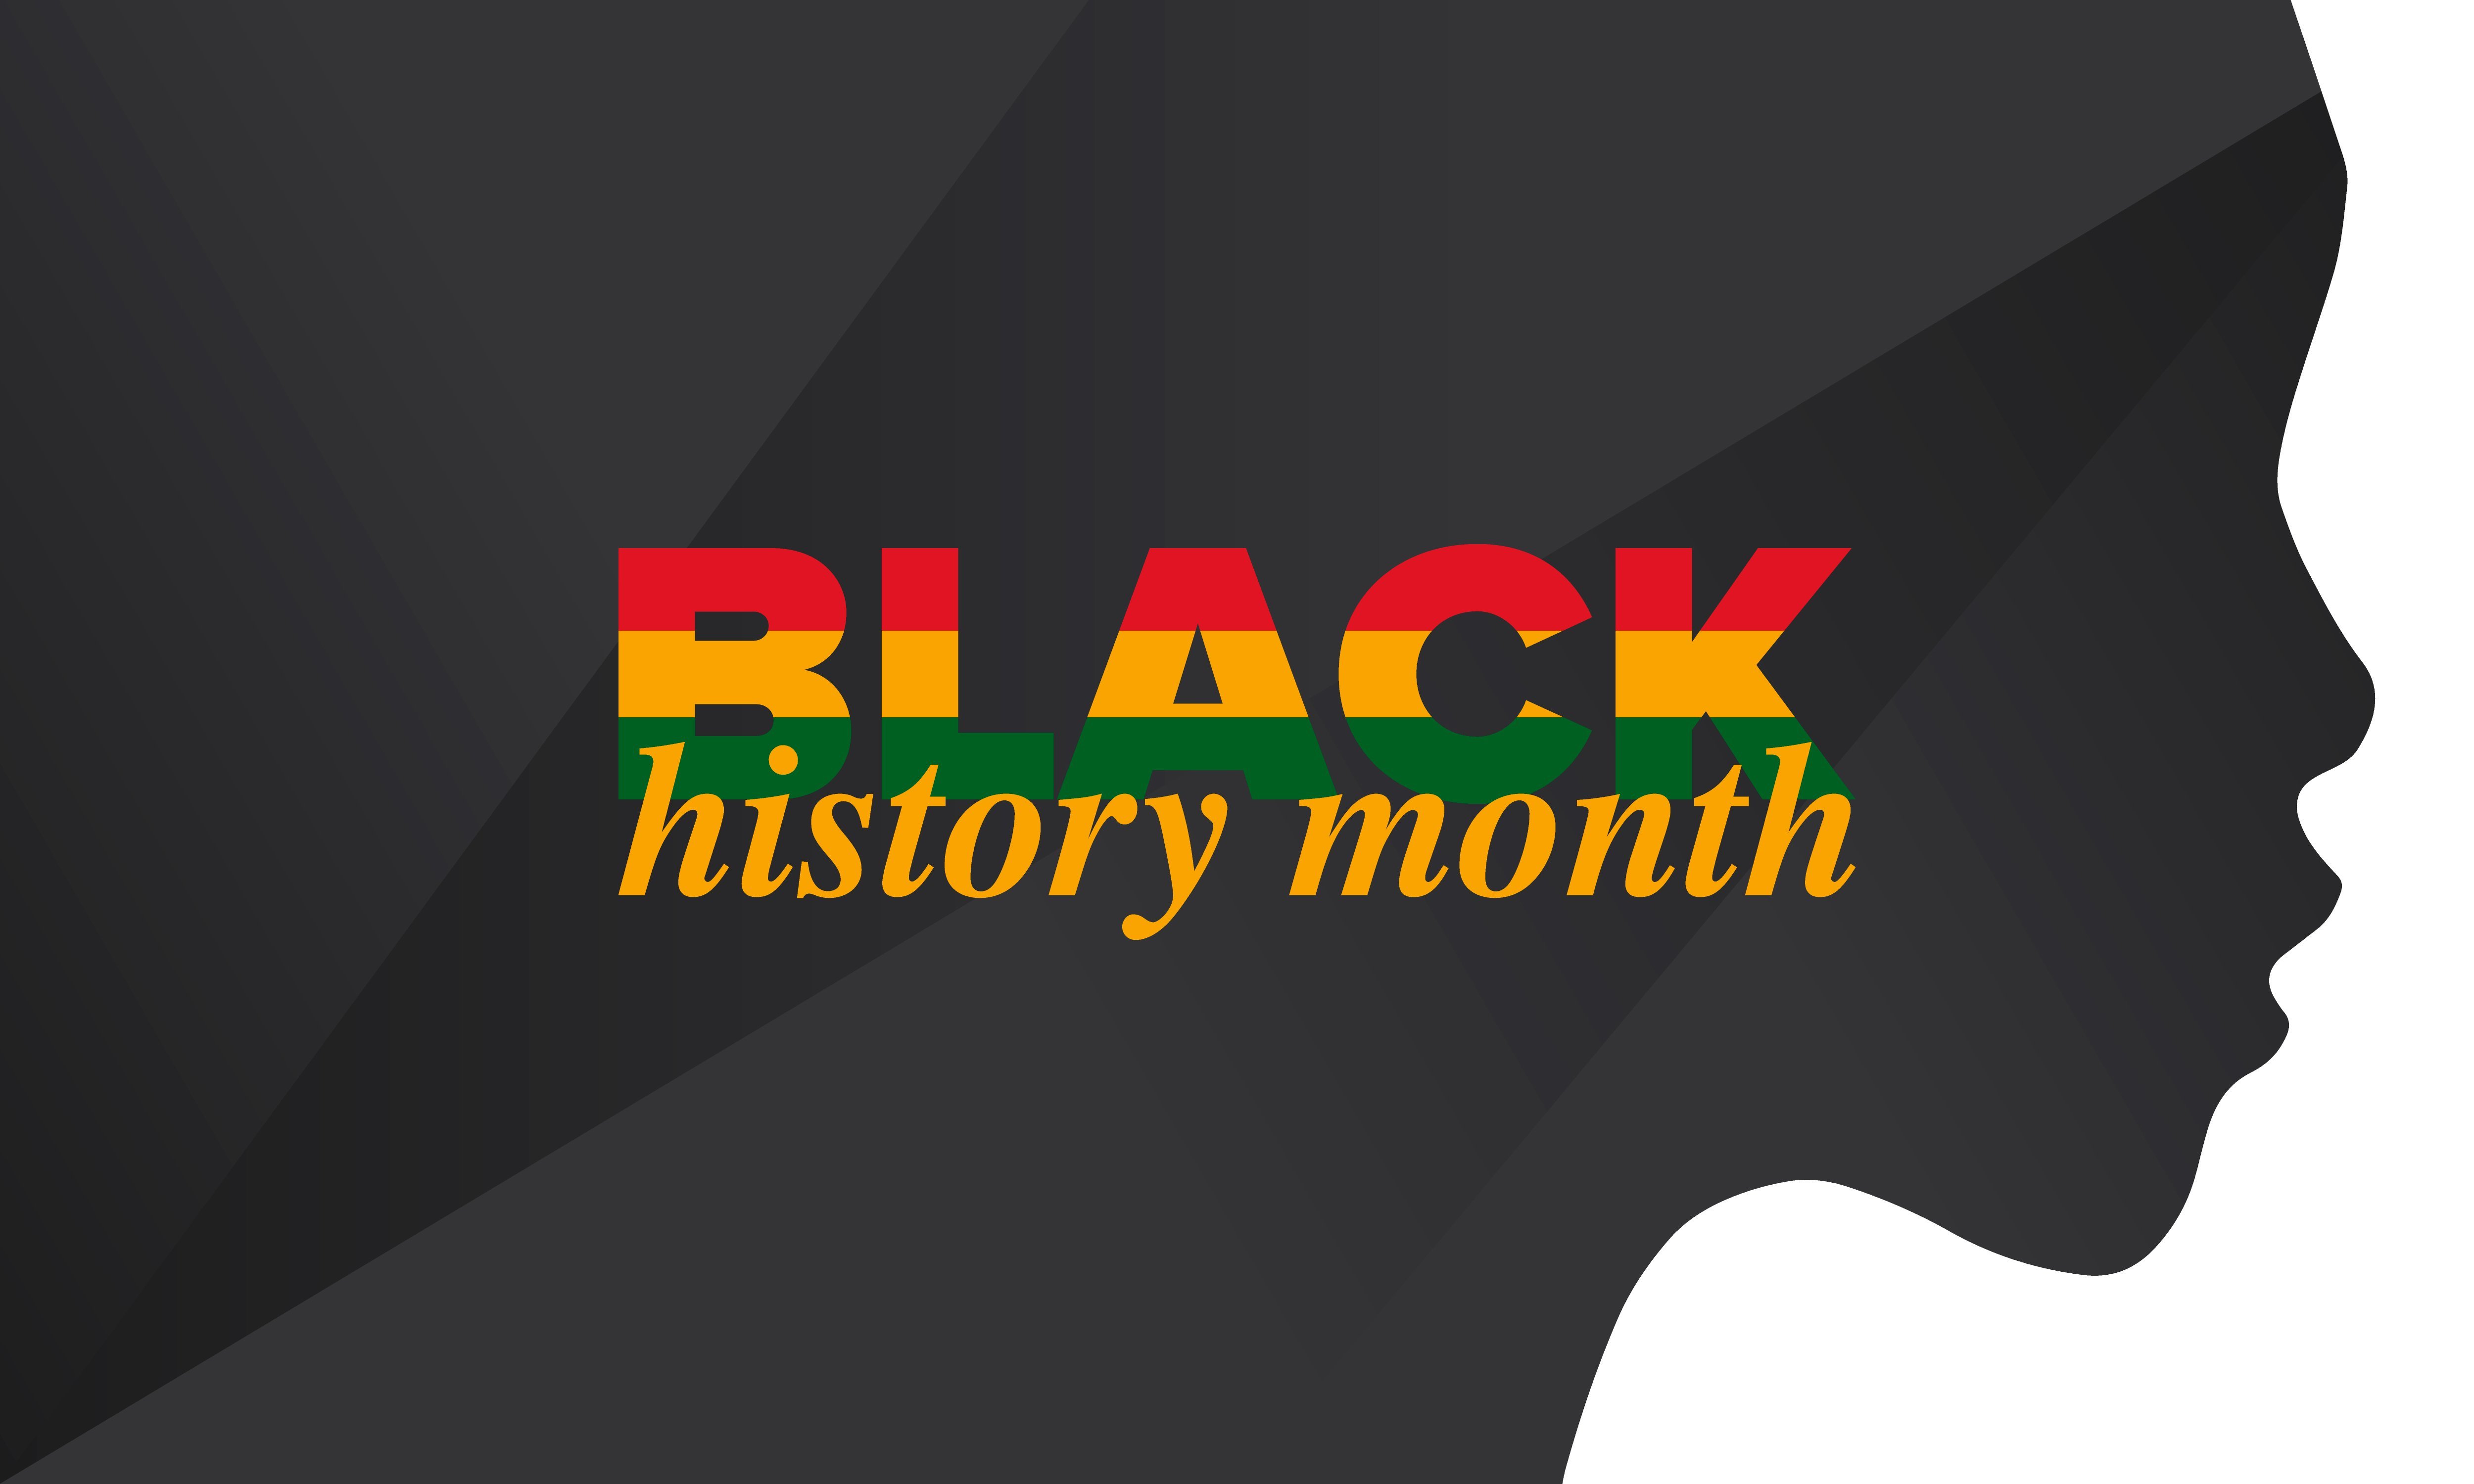 Black History Month. African American History. Celebrated annual. In February in United States and Canada. In October in Great Britain. Poster, card, banner, background|Photo: Getty Images